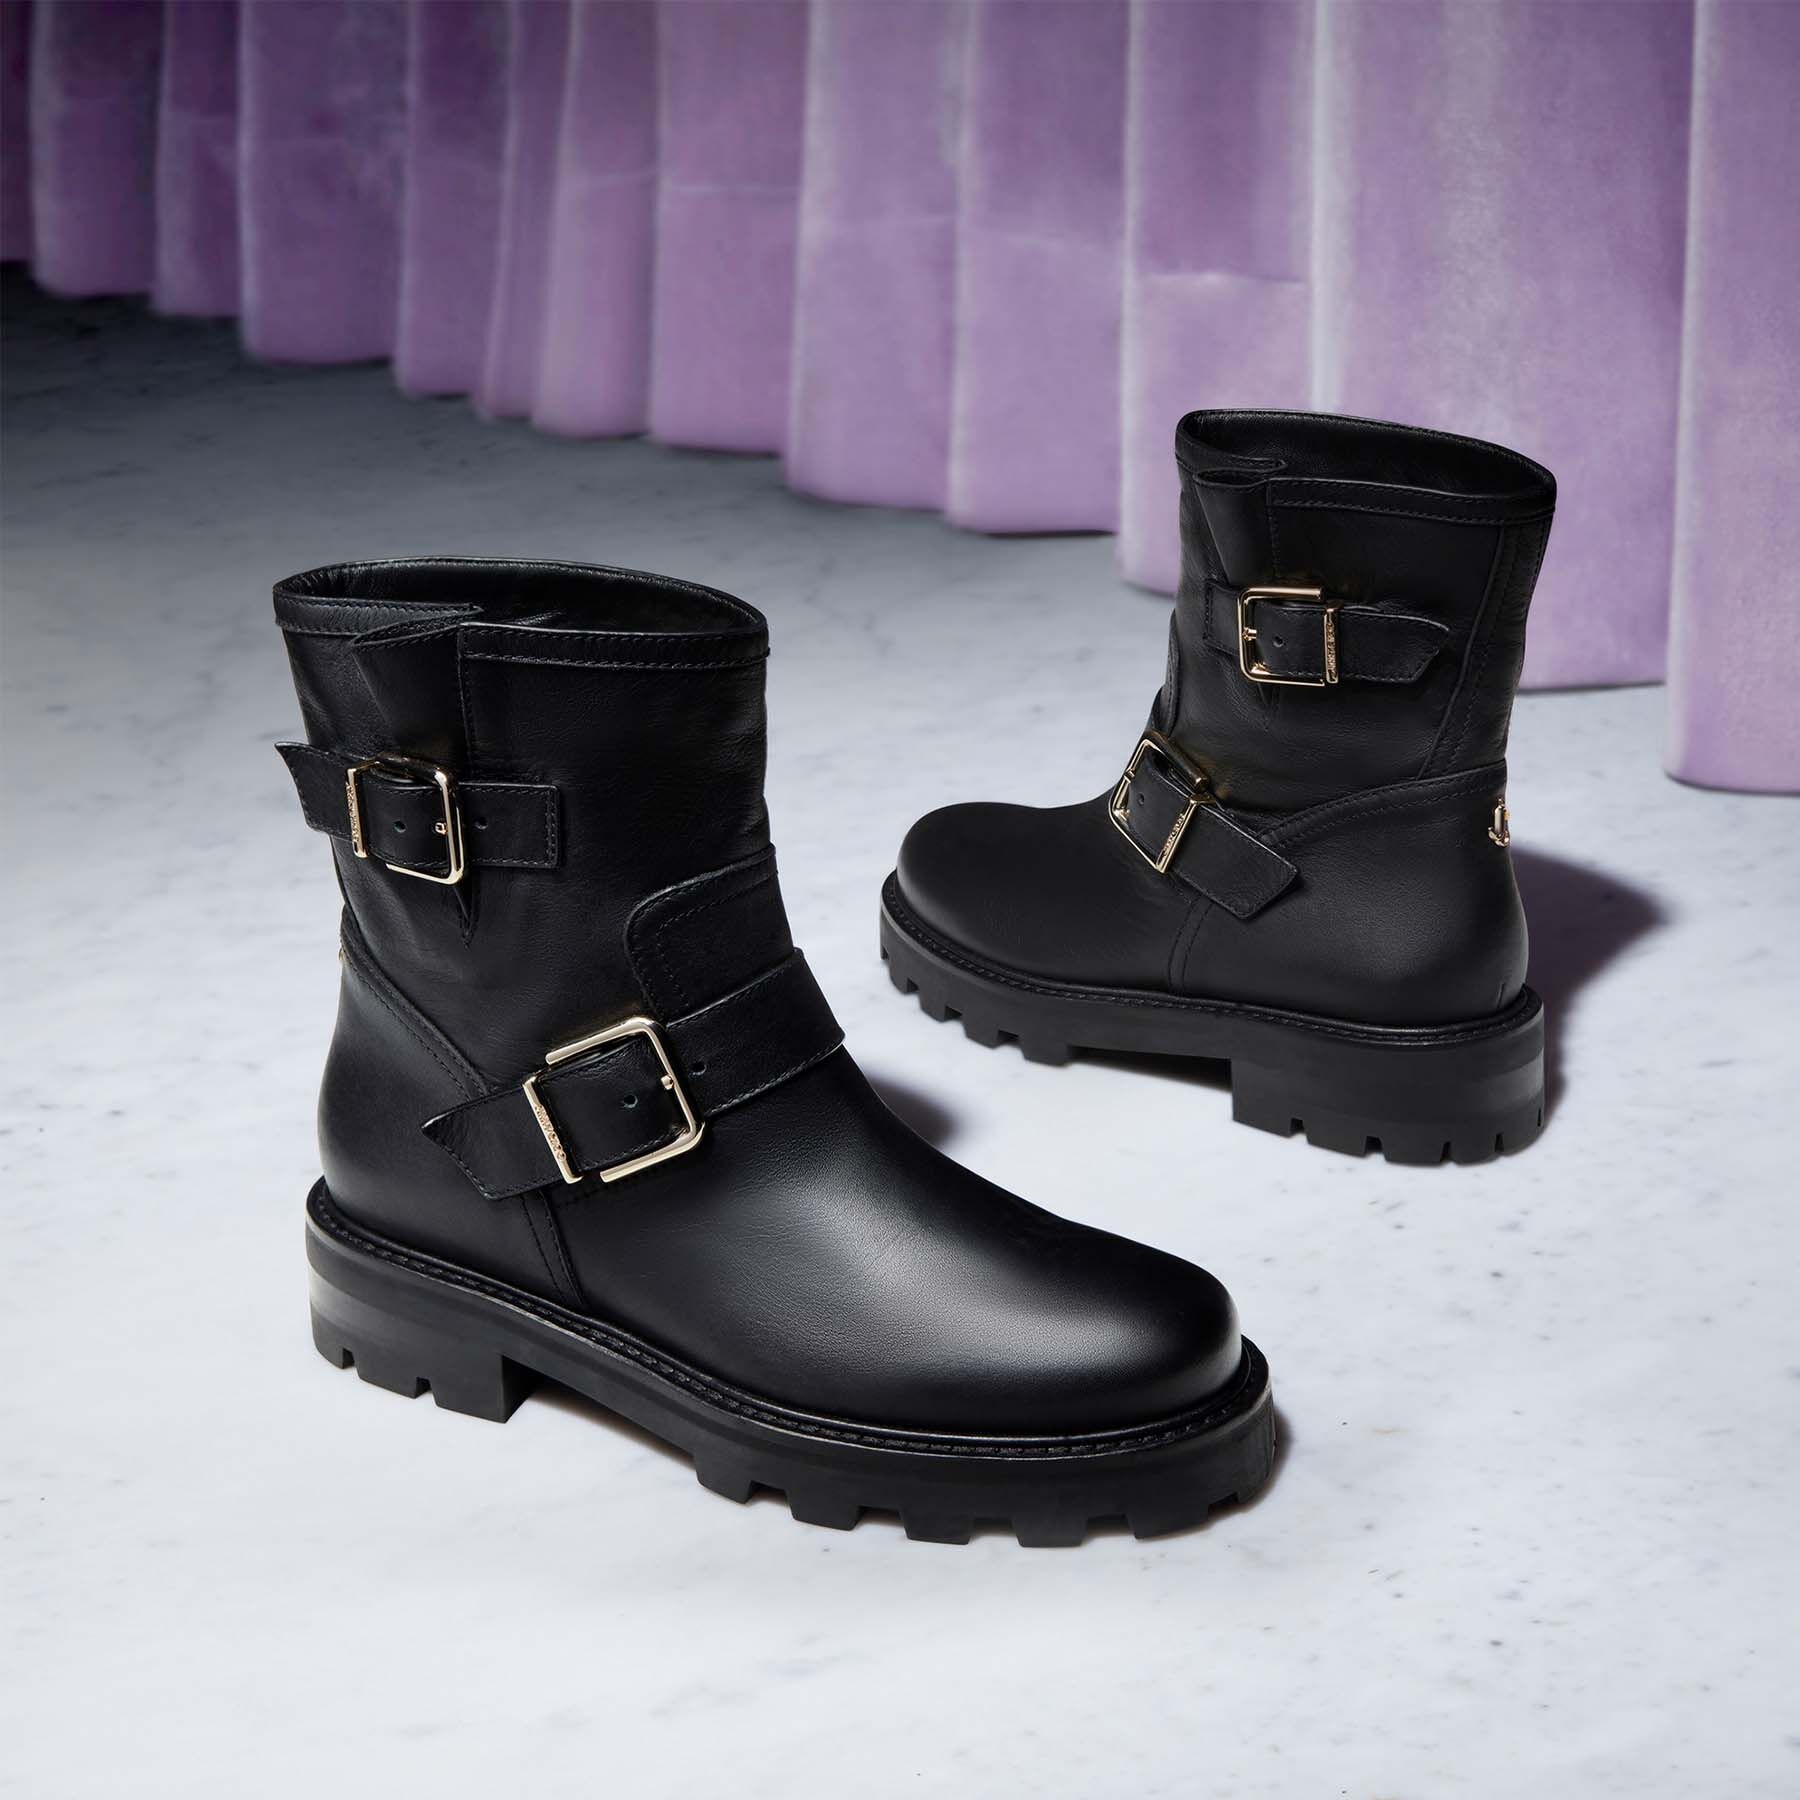 Youth II
Black Smooth Leather Biker Boots with Gold Buckles - 6